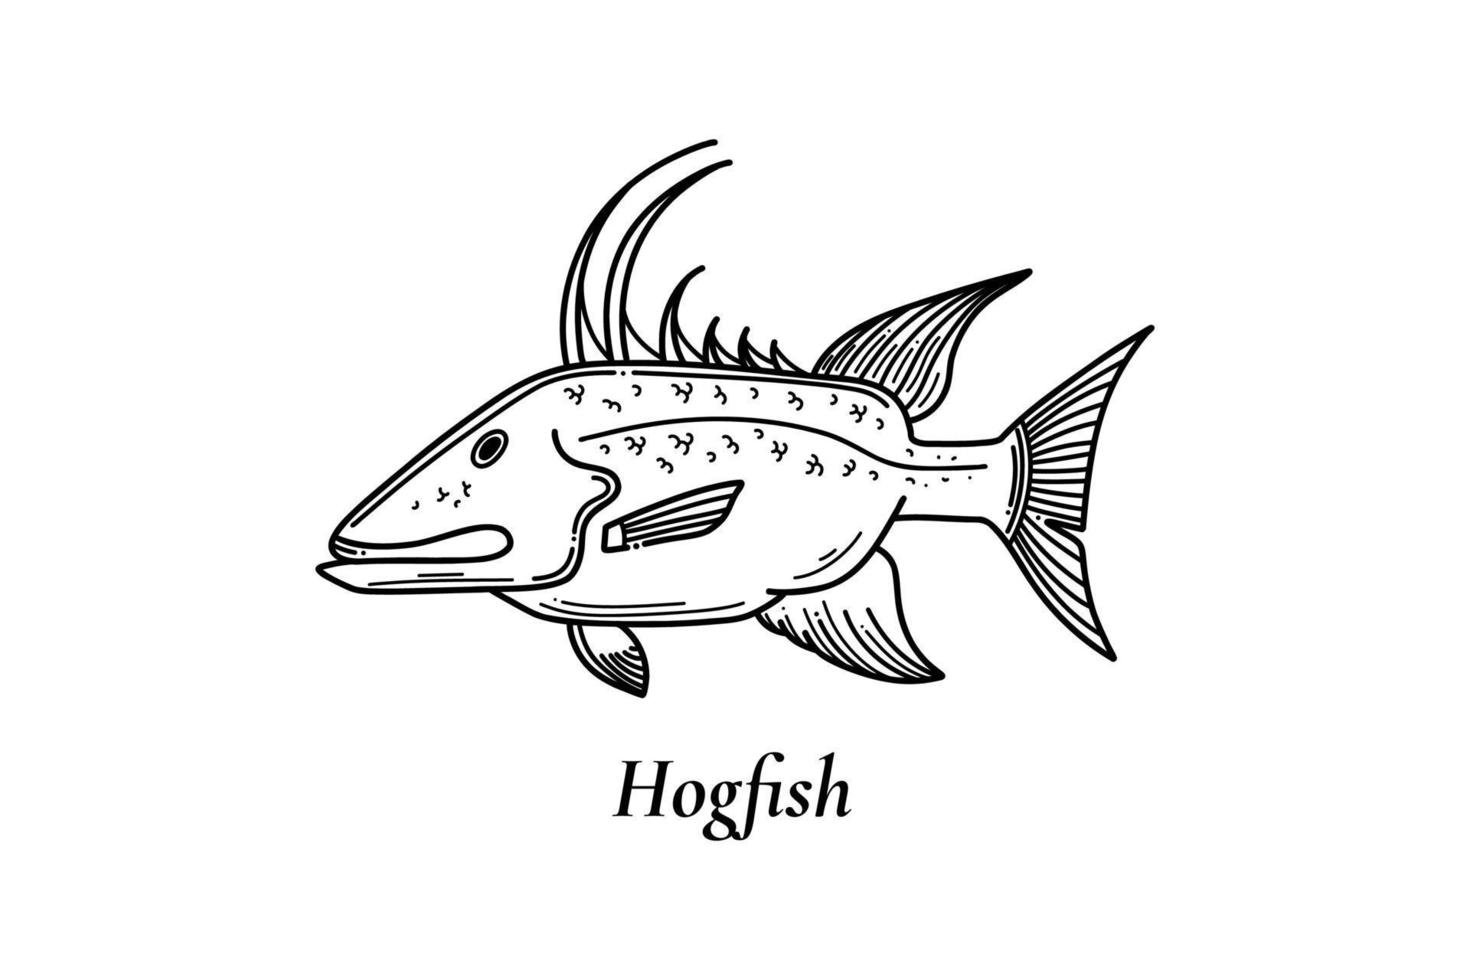 Hogfish vector illustration in sketch style great to use as your fishing activity